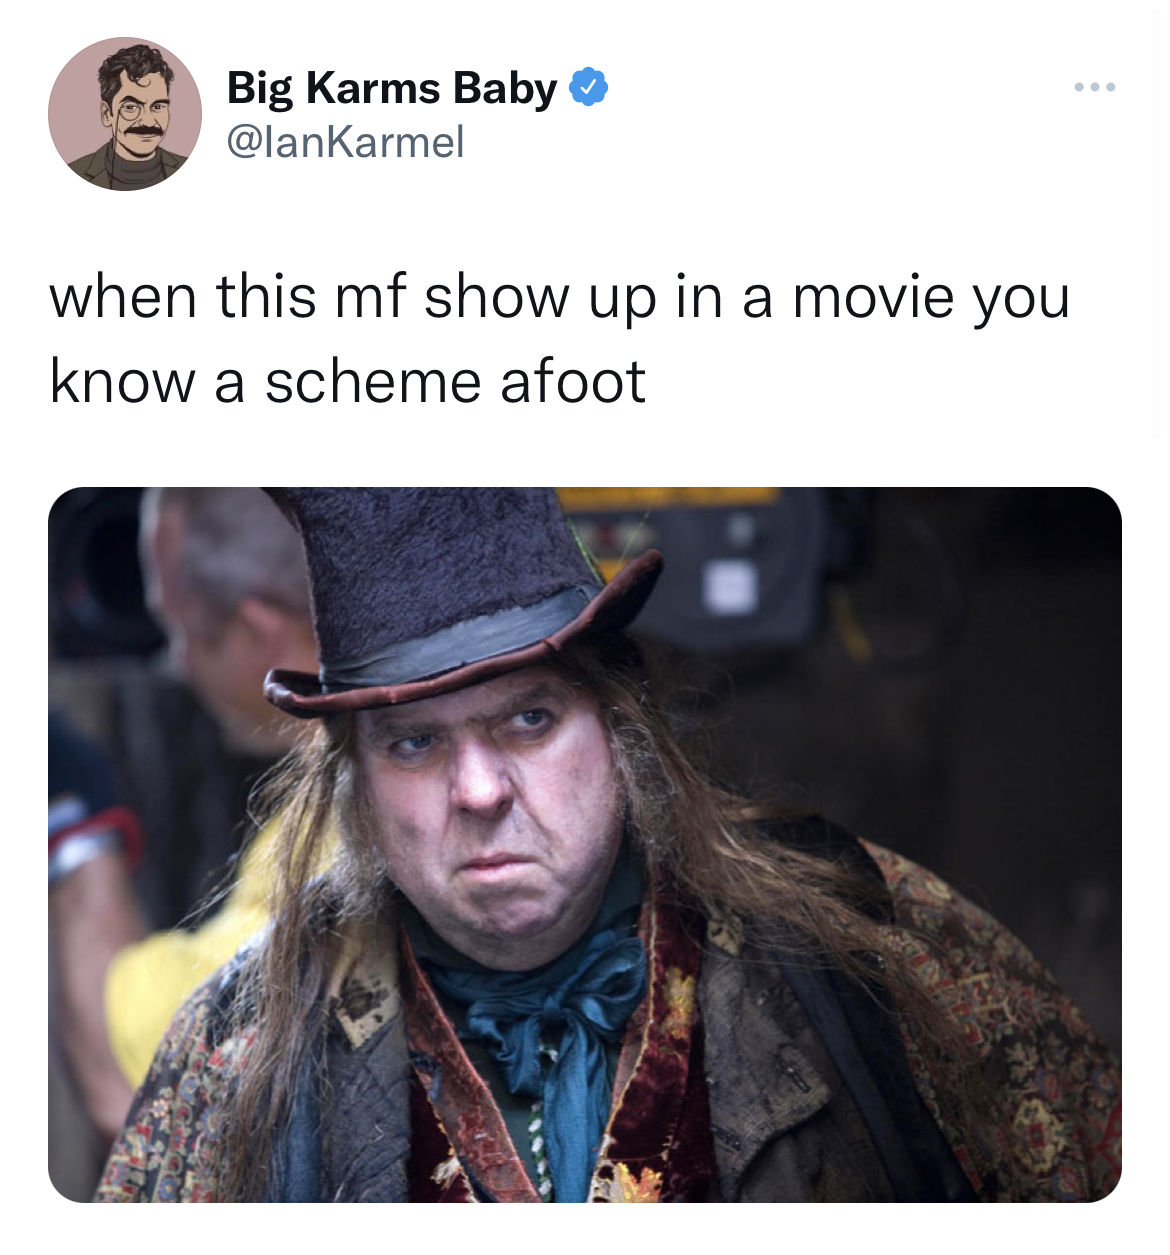 funny and fresh tweets - oliver twist fagin - Big Karms Baby when this mf show up in a movie you know a scheme afoot